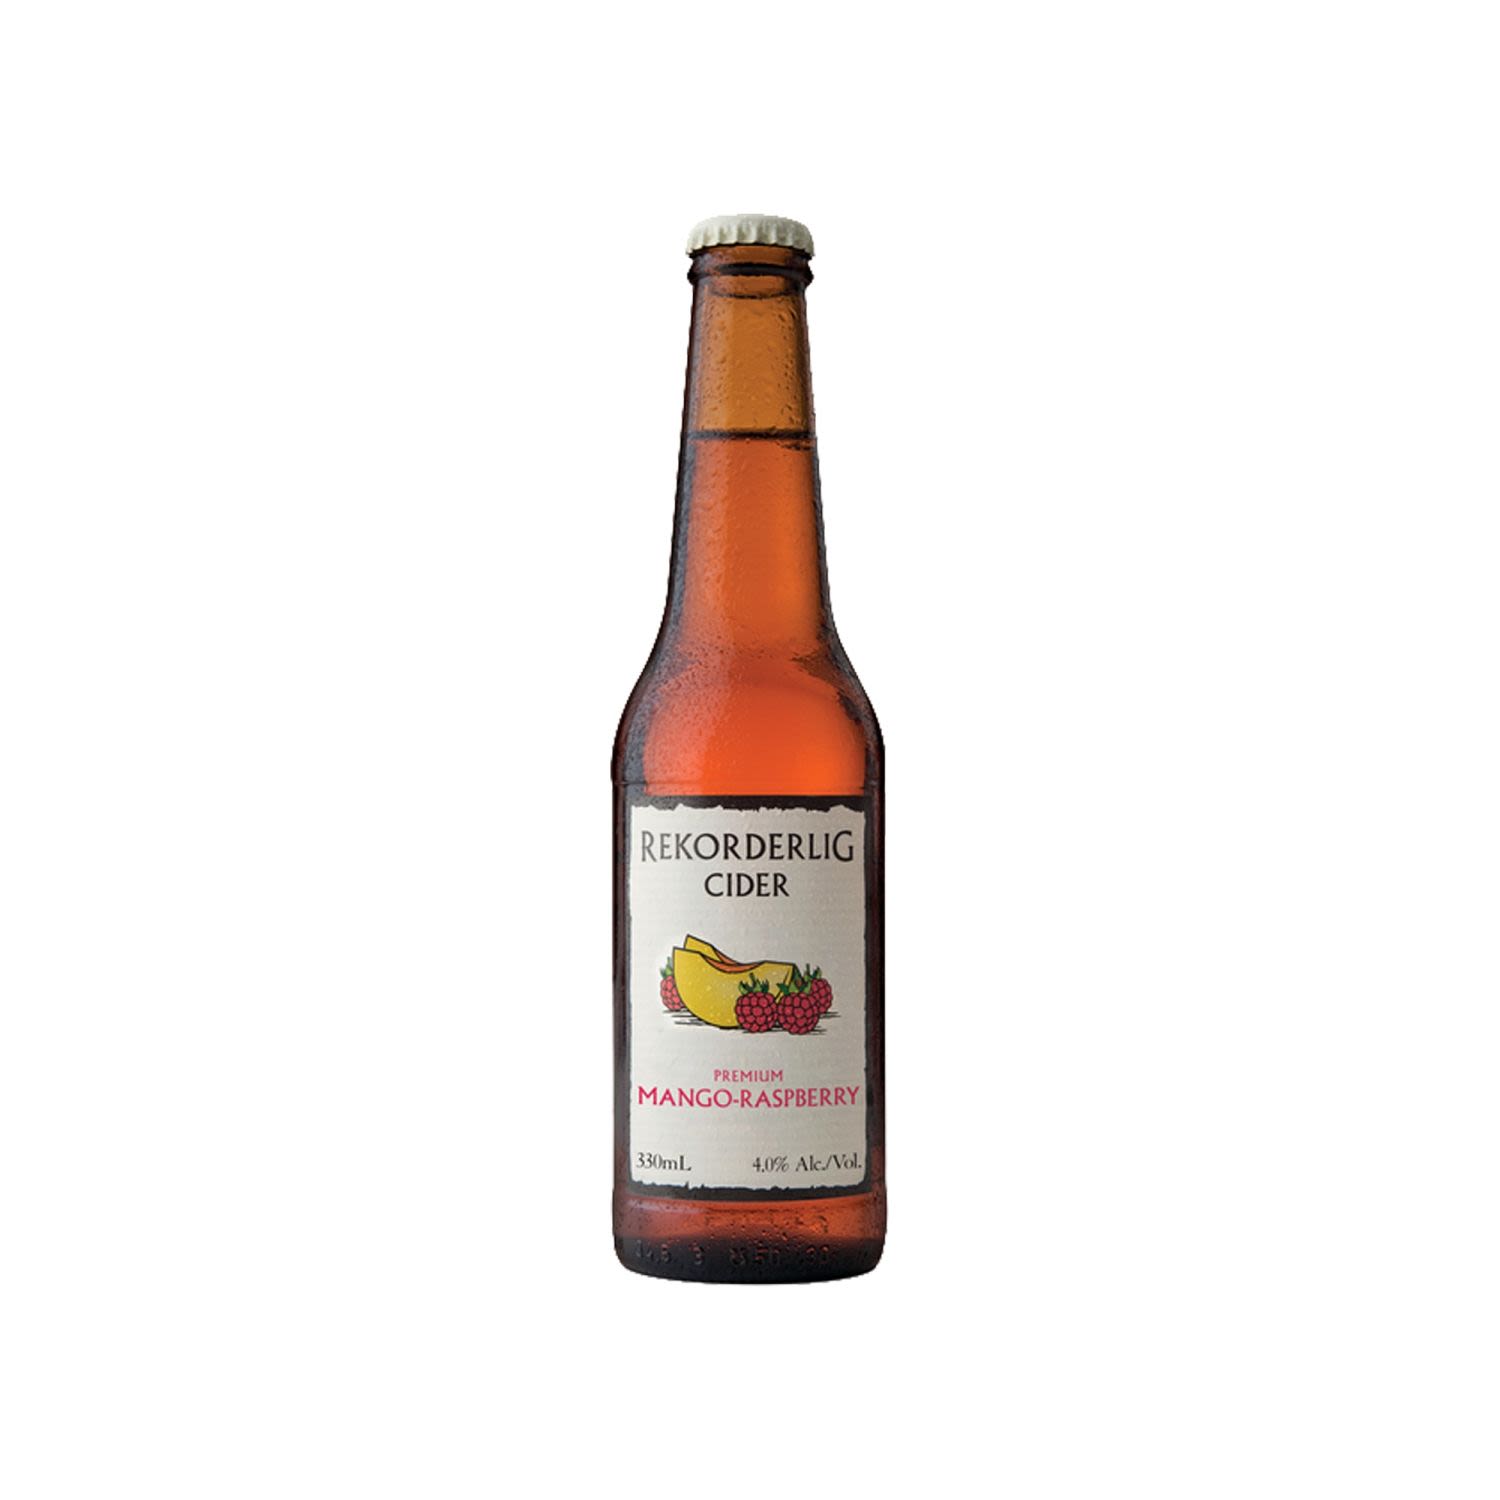 Rekorderlig Mango-Raspberry Cider is a sweet tropical cider with the intense fragrance and flavour of ripe mango with a hint of wild raspberries. It is best served cold over ice with a squeeze of lemon.<br /> <br />Alcohol Volume: 4.00%<br /><br />Pack Format: 24 Pack<br /><br />Standard Drinks: 1</br /><br />Pack Type: Bottle<br /><br />Country of Origin: Sweden<br />